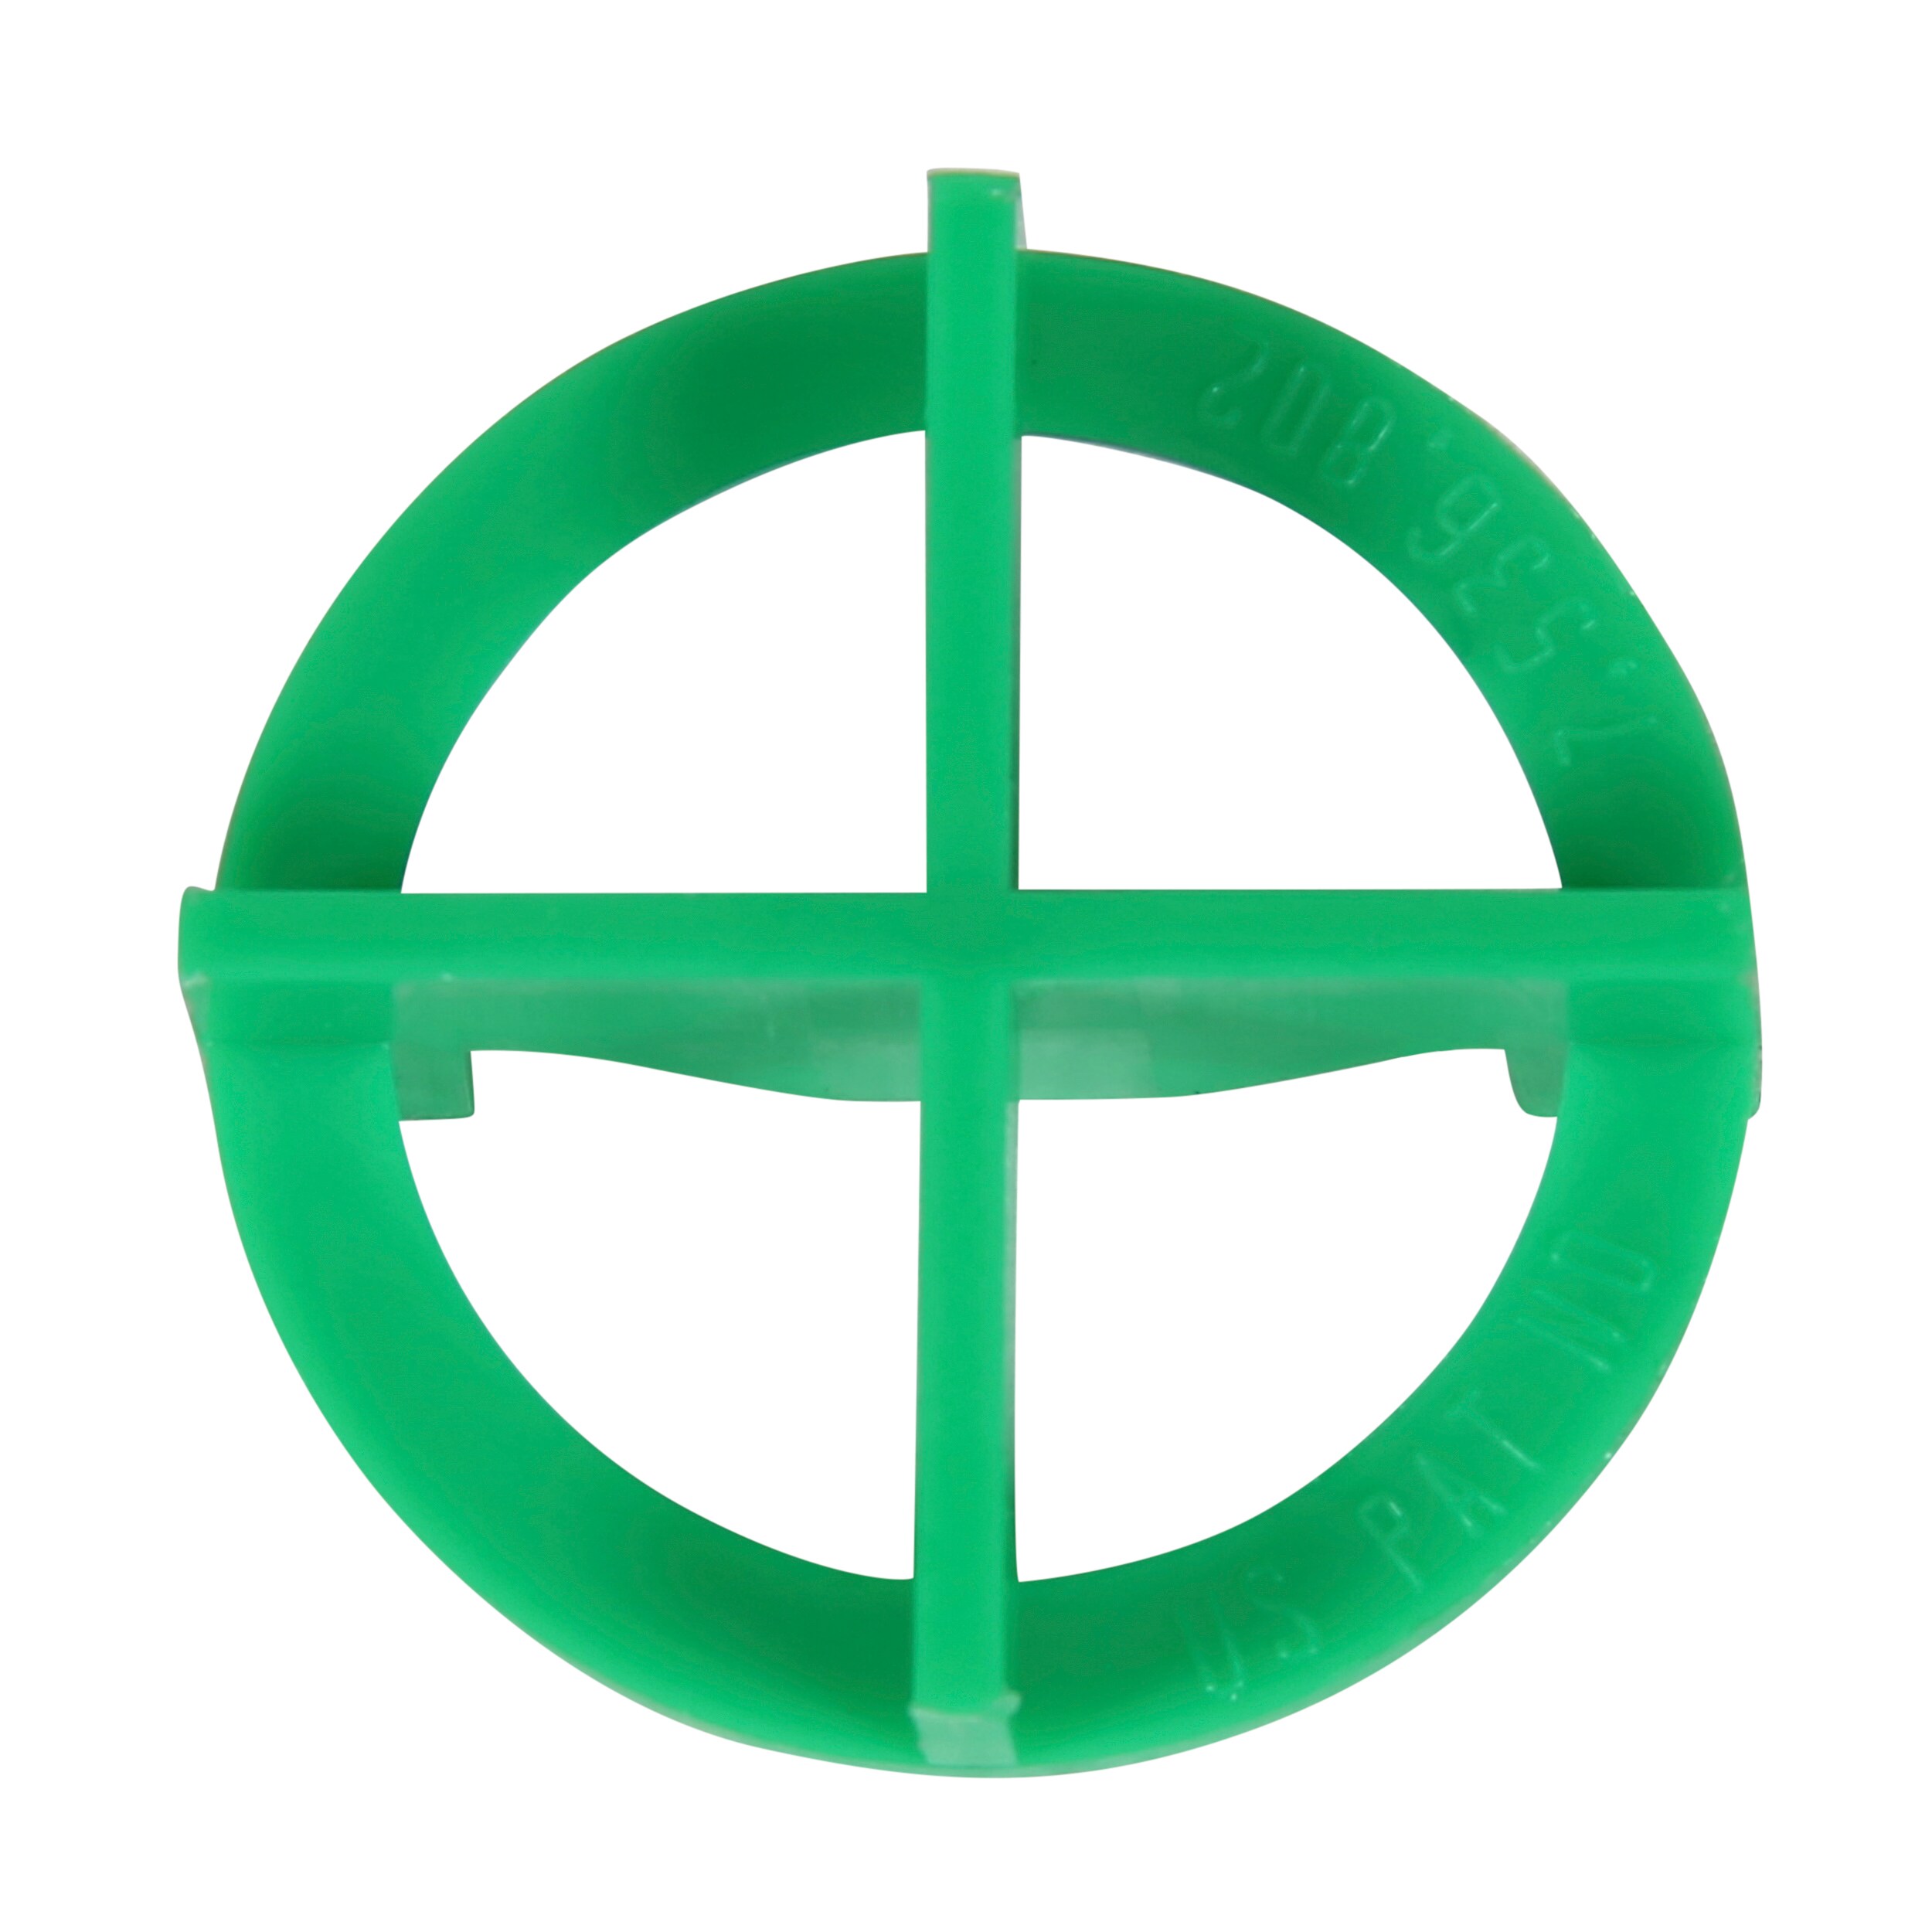 100 Circular rOund TILE SPACERS 1/16" 1.5 mm 2 sided GREEN Plastic TAVY 1002 